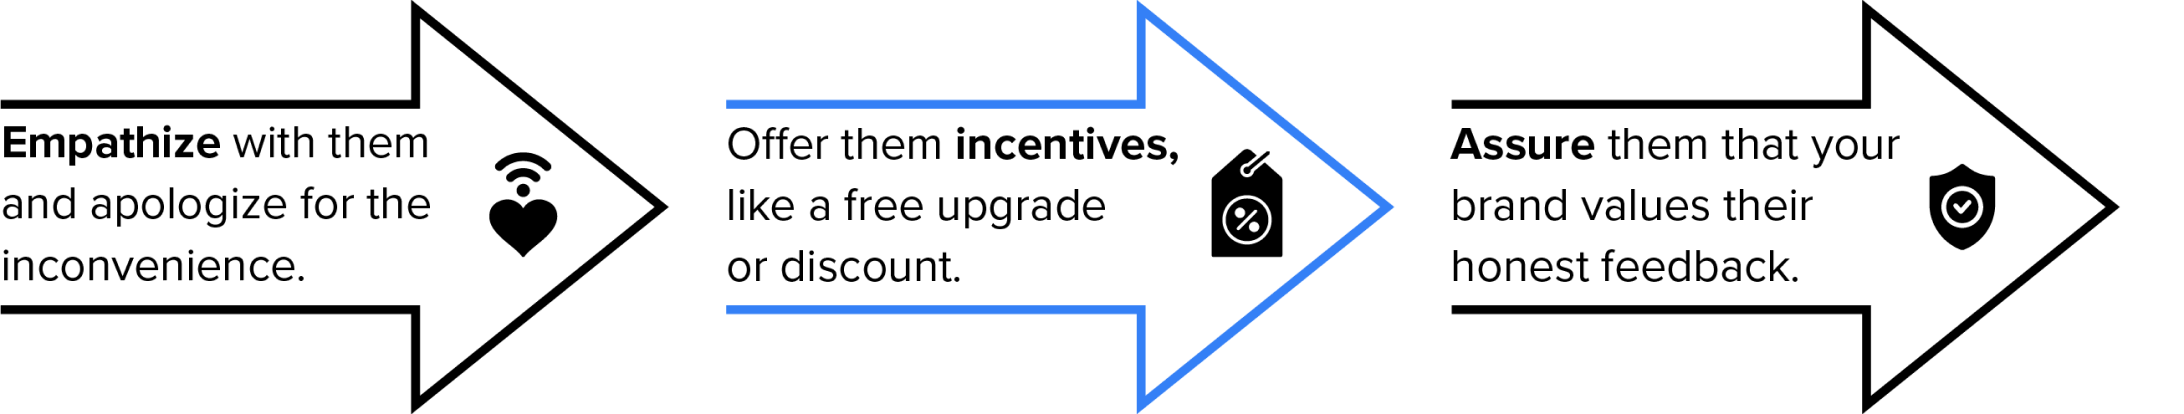 A diagram with three arrows pointing right and within each of those arrows is a blurb about what to do when following up with detractors.